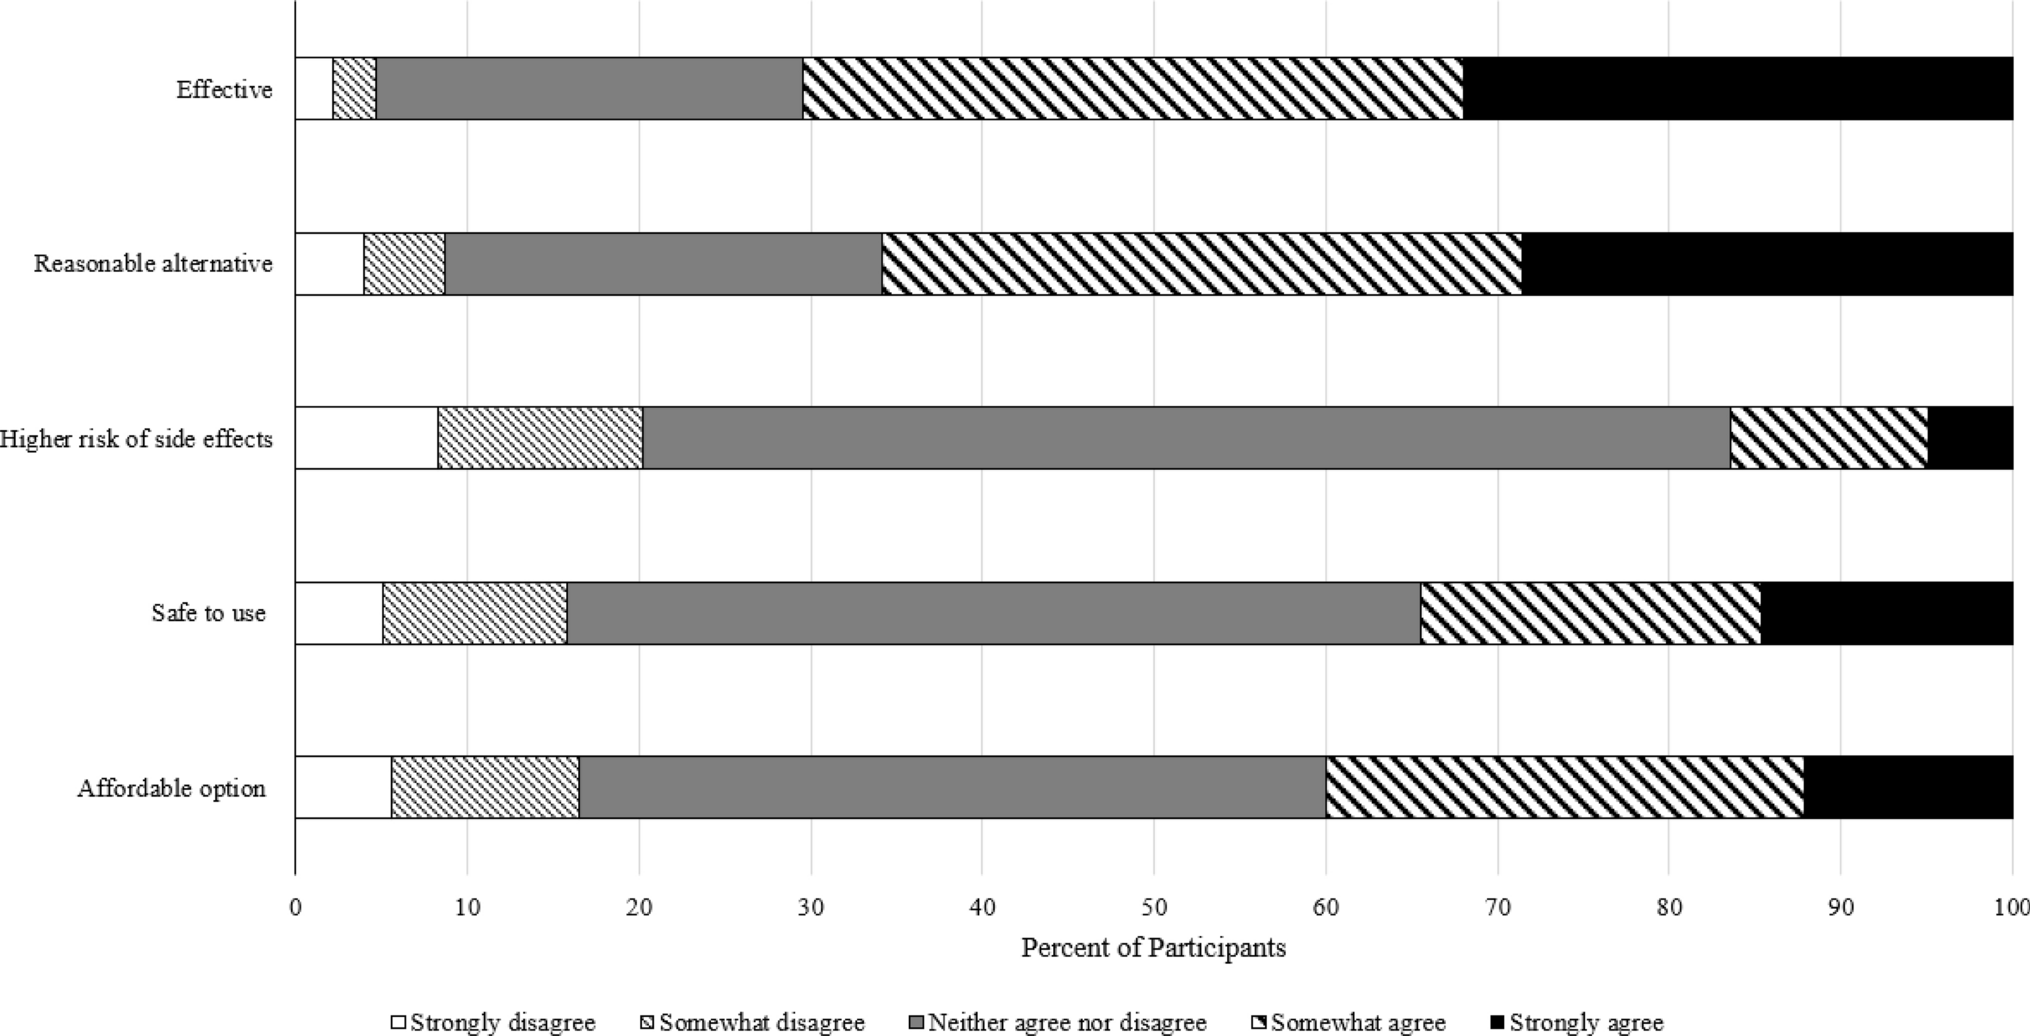 Older Canadians’ Perceptions of the Safety, Effectiveness and Accessibility of Cannabis for Medicinal Purposes: A Cross-Sectional Analysis